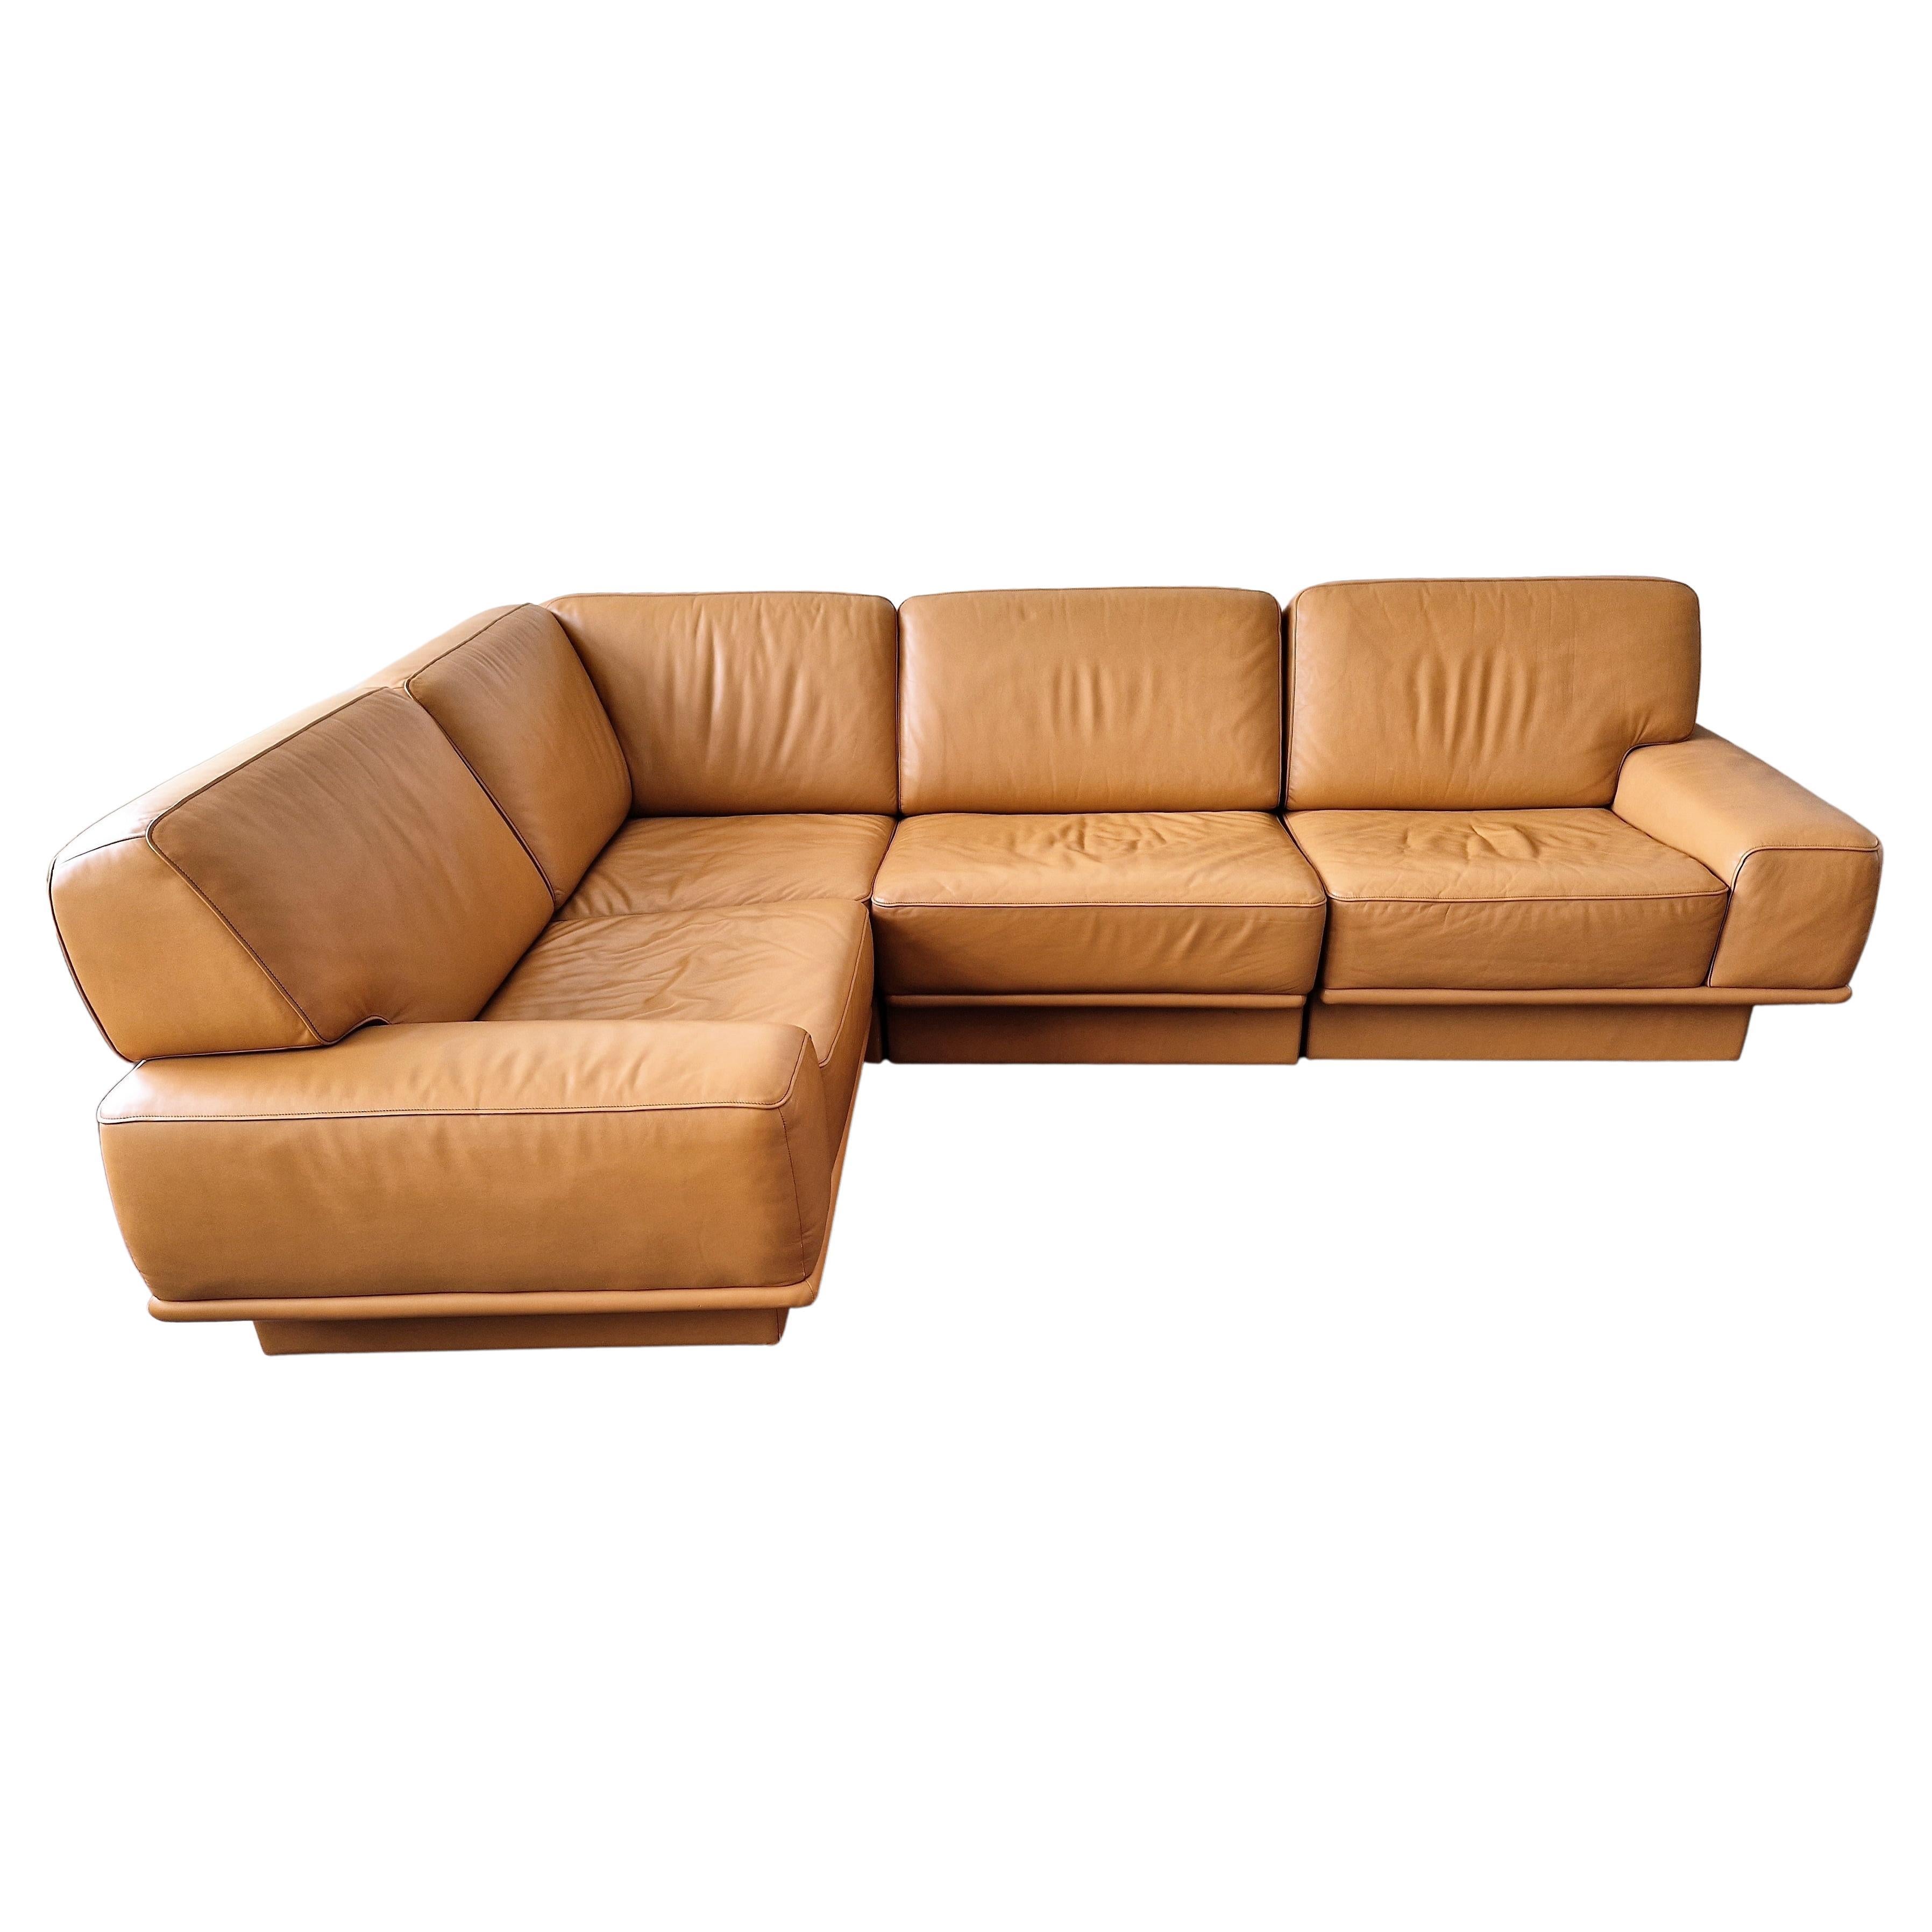 Midcentury Leather Sectional Corner Sofa by De Sede, Switzerland For Sale